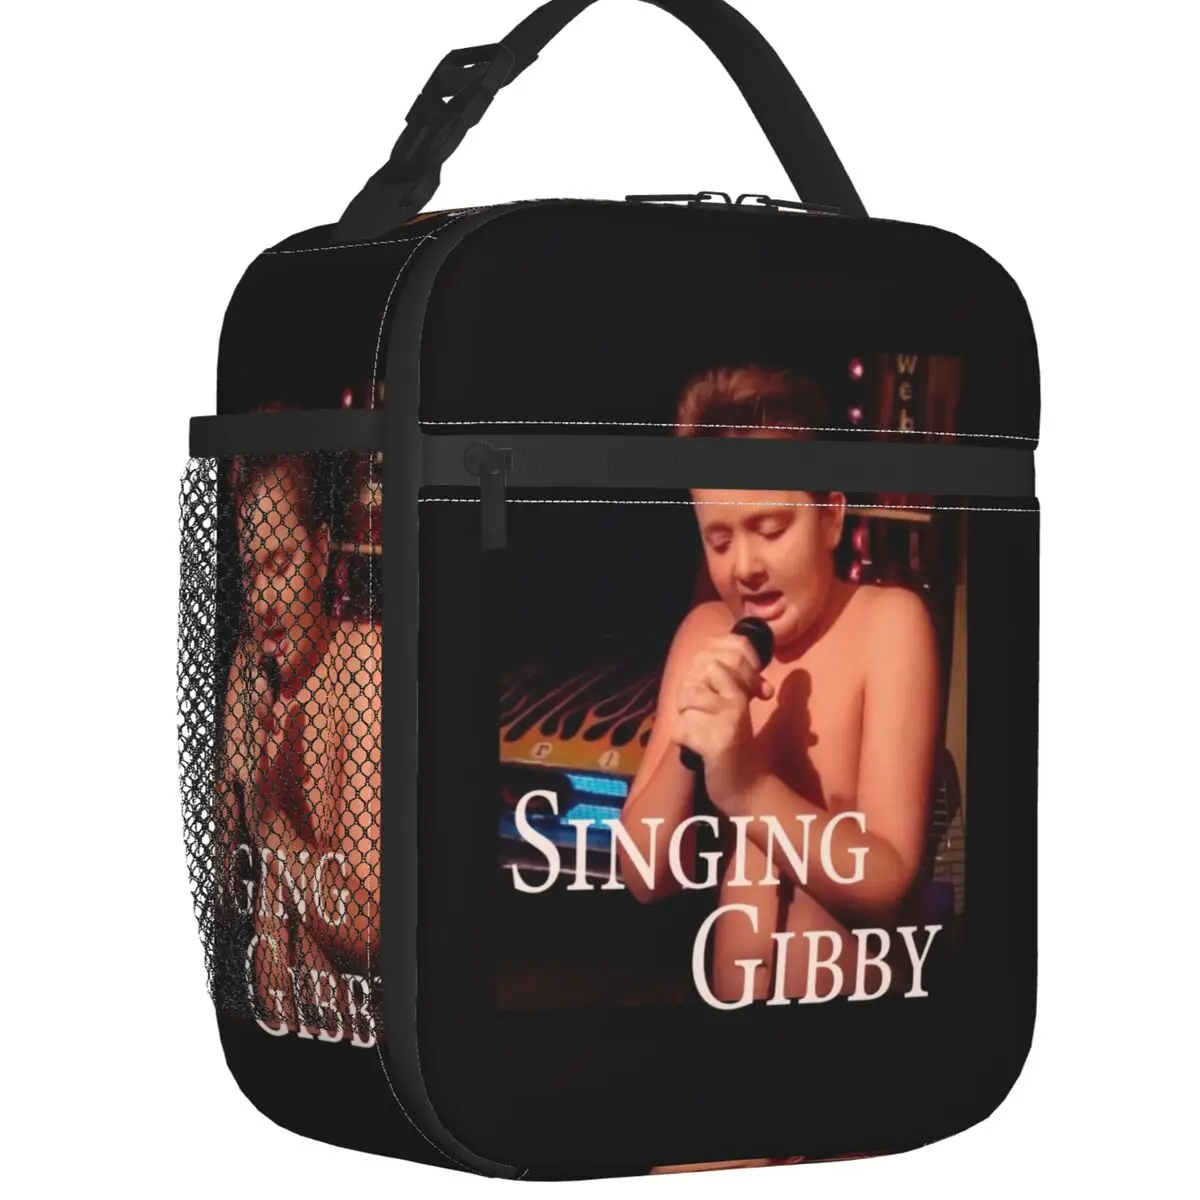 

Gibby Singing ICarly Meme Insulated Lunch Bag for Women Leakproof Cooler Thermal Lunch Box Office Work School